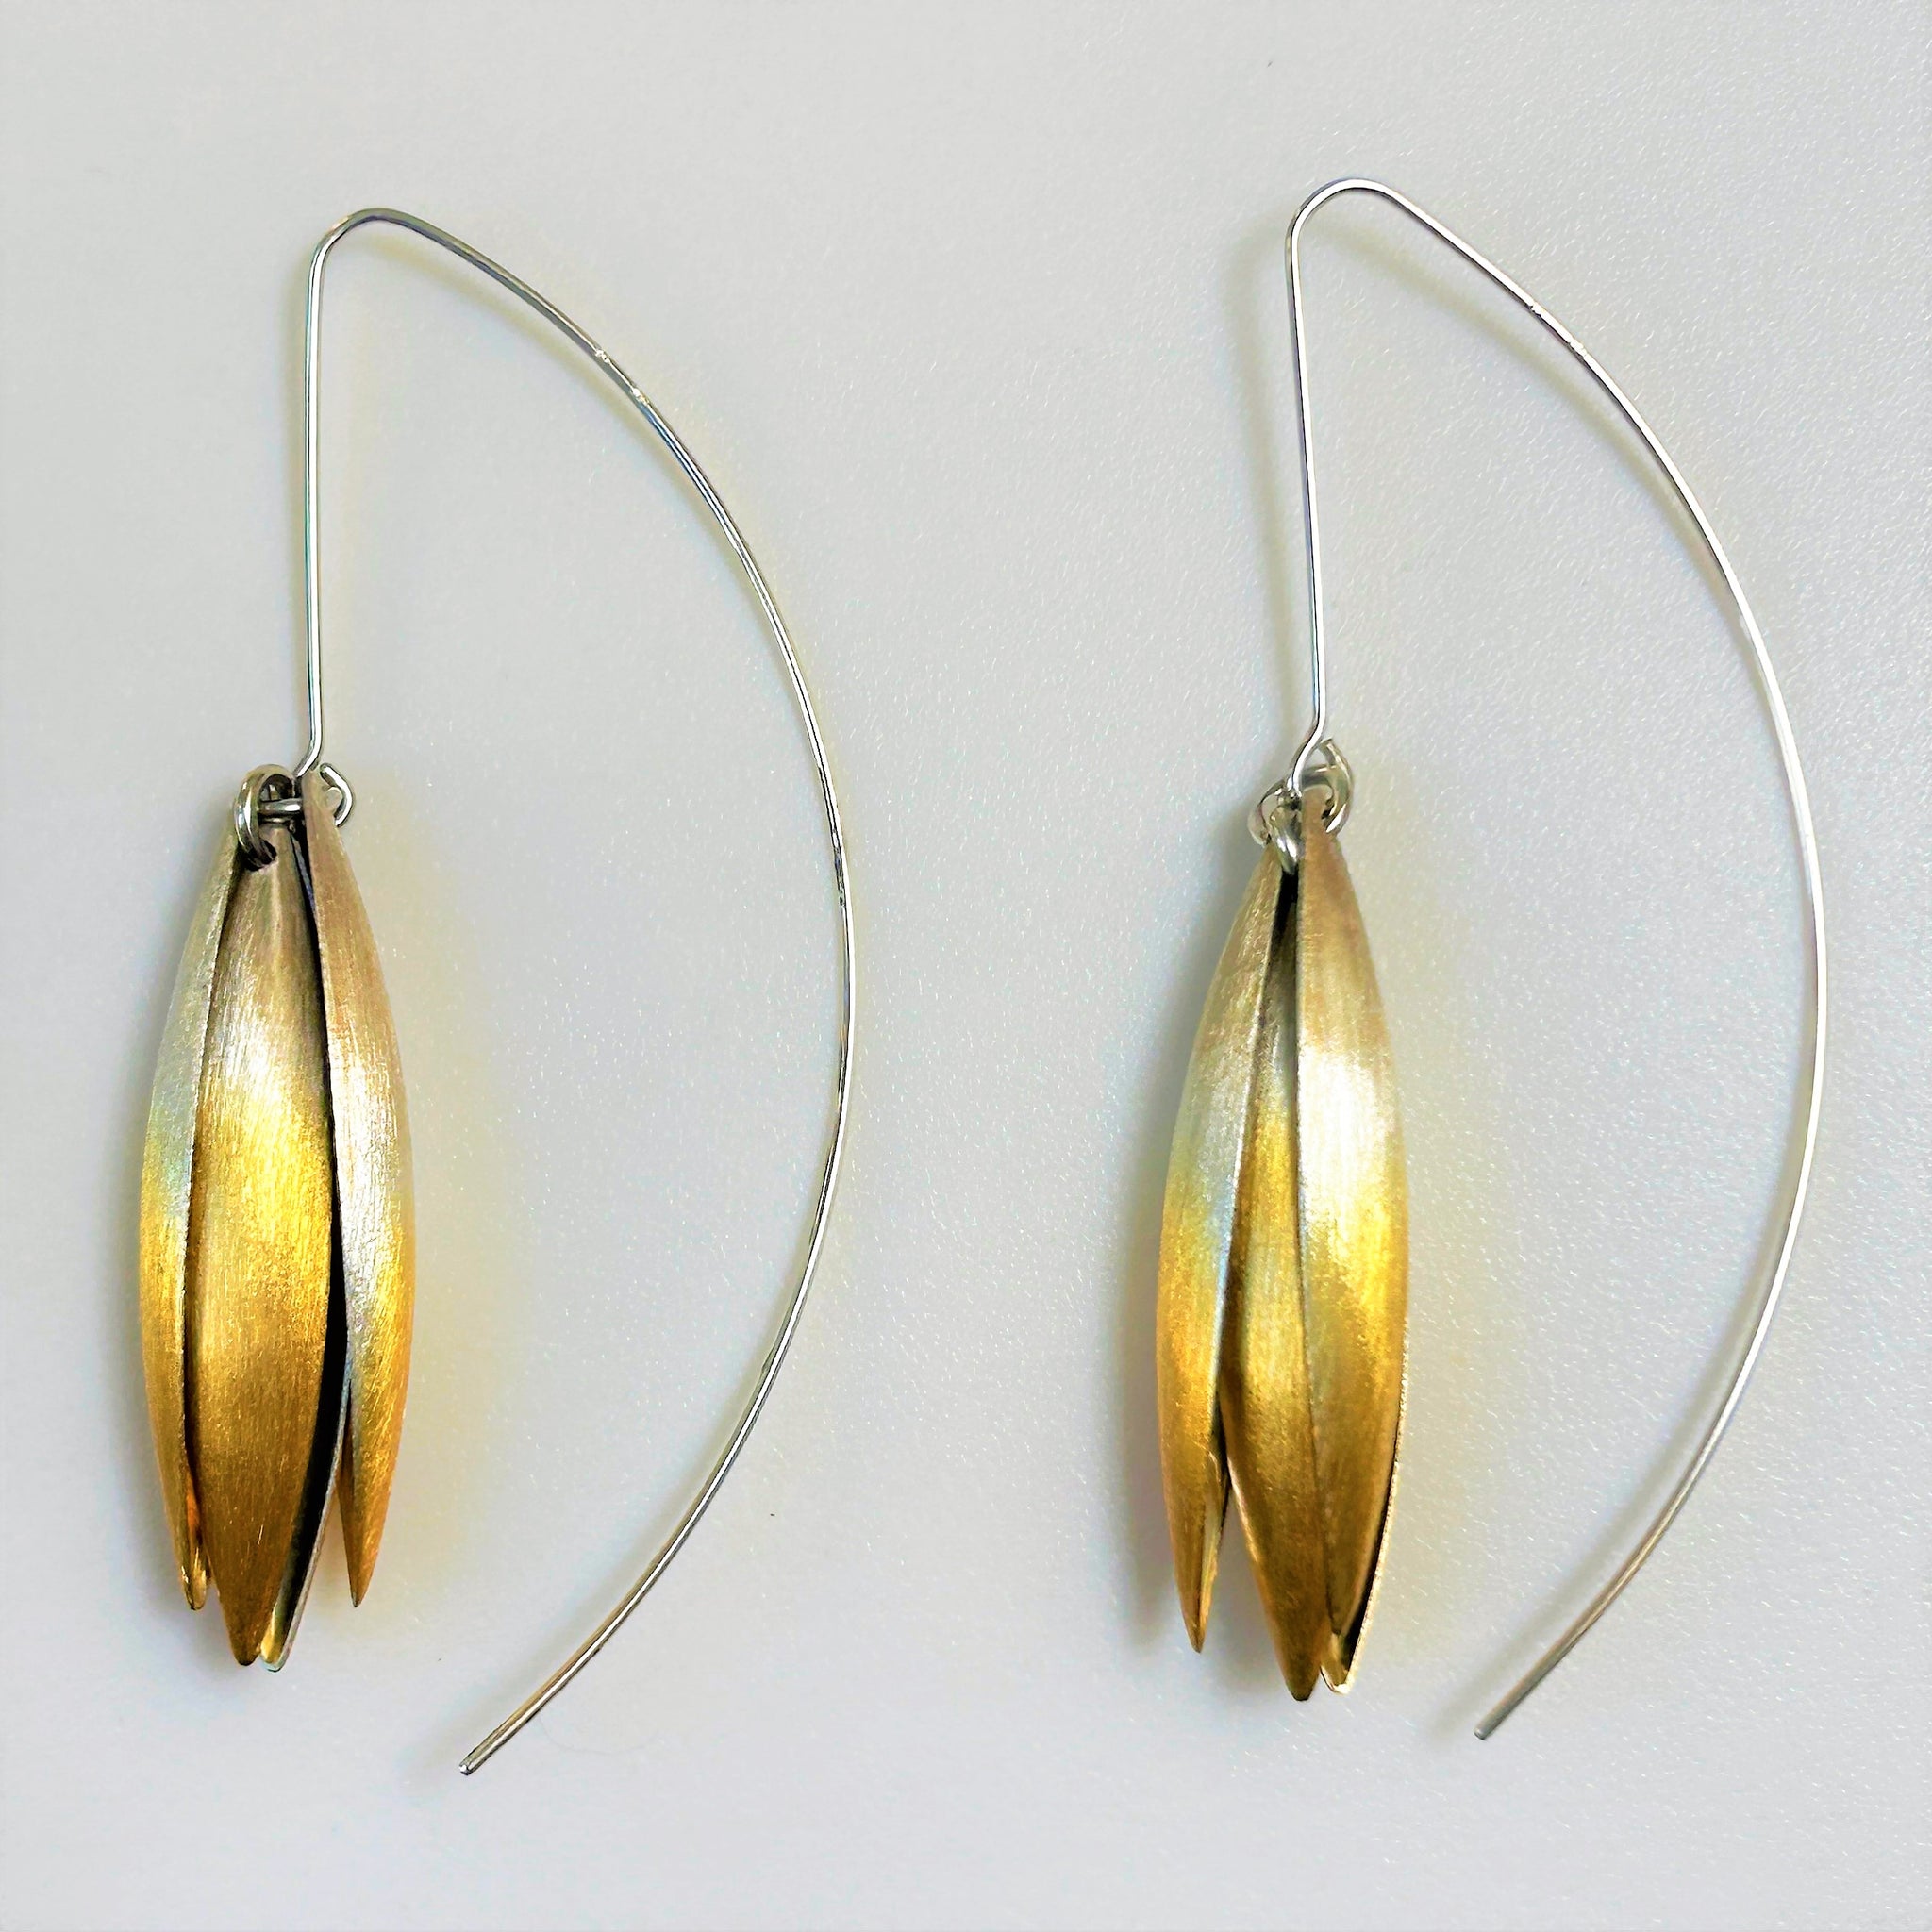 Large Sonia Tyminska, Poland, Gold-Plated Sterling Silver Drop Earrings